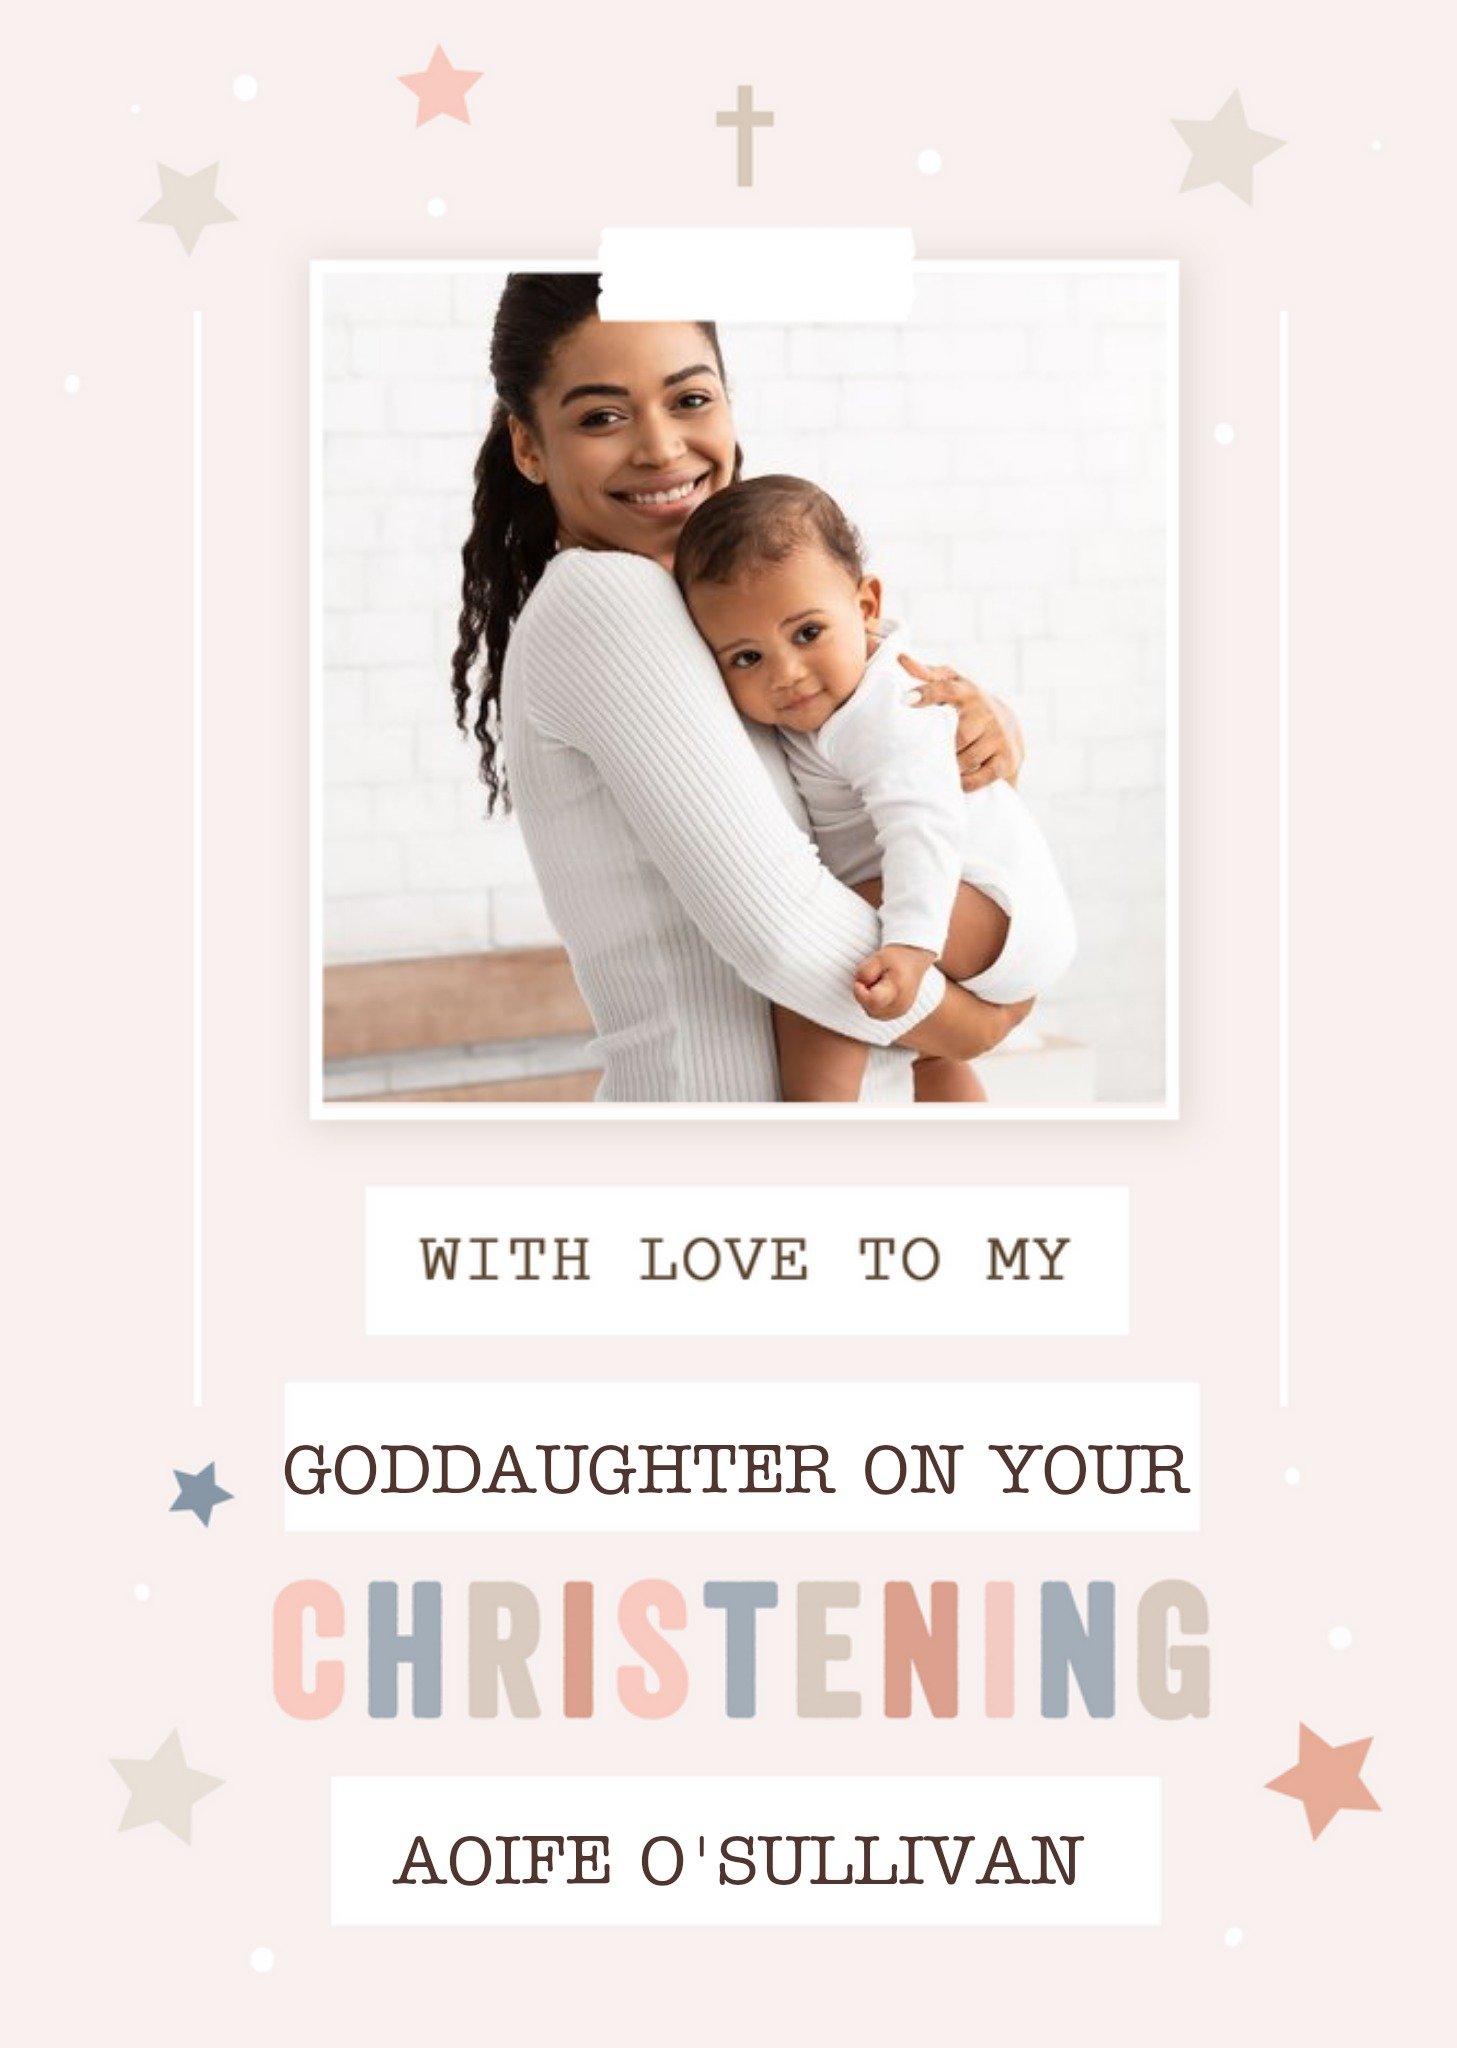 Friends You Are Golden Christening Congratulations Photo Upload Card, Large